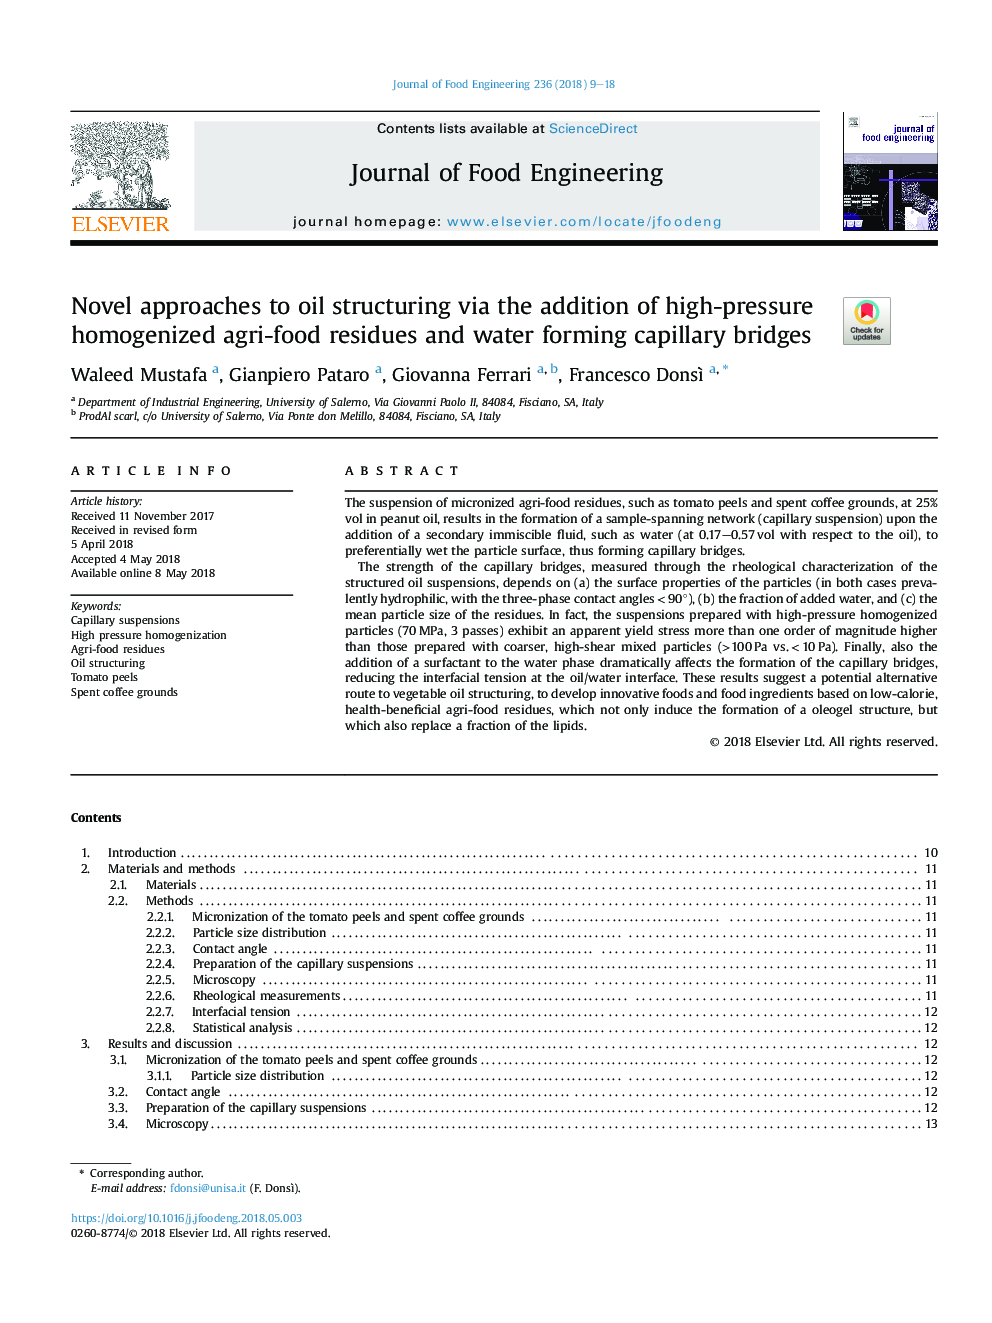 Novel approaches to oil structuring via the addition of high-pressure homogenized agri-food residues and water forming capillary bridges